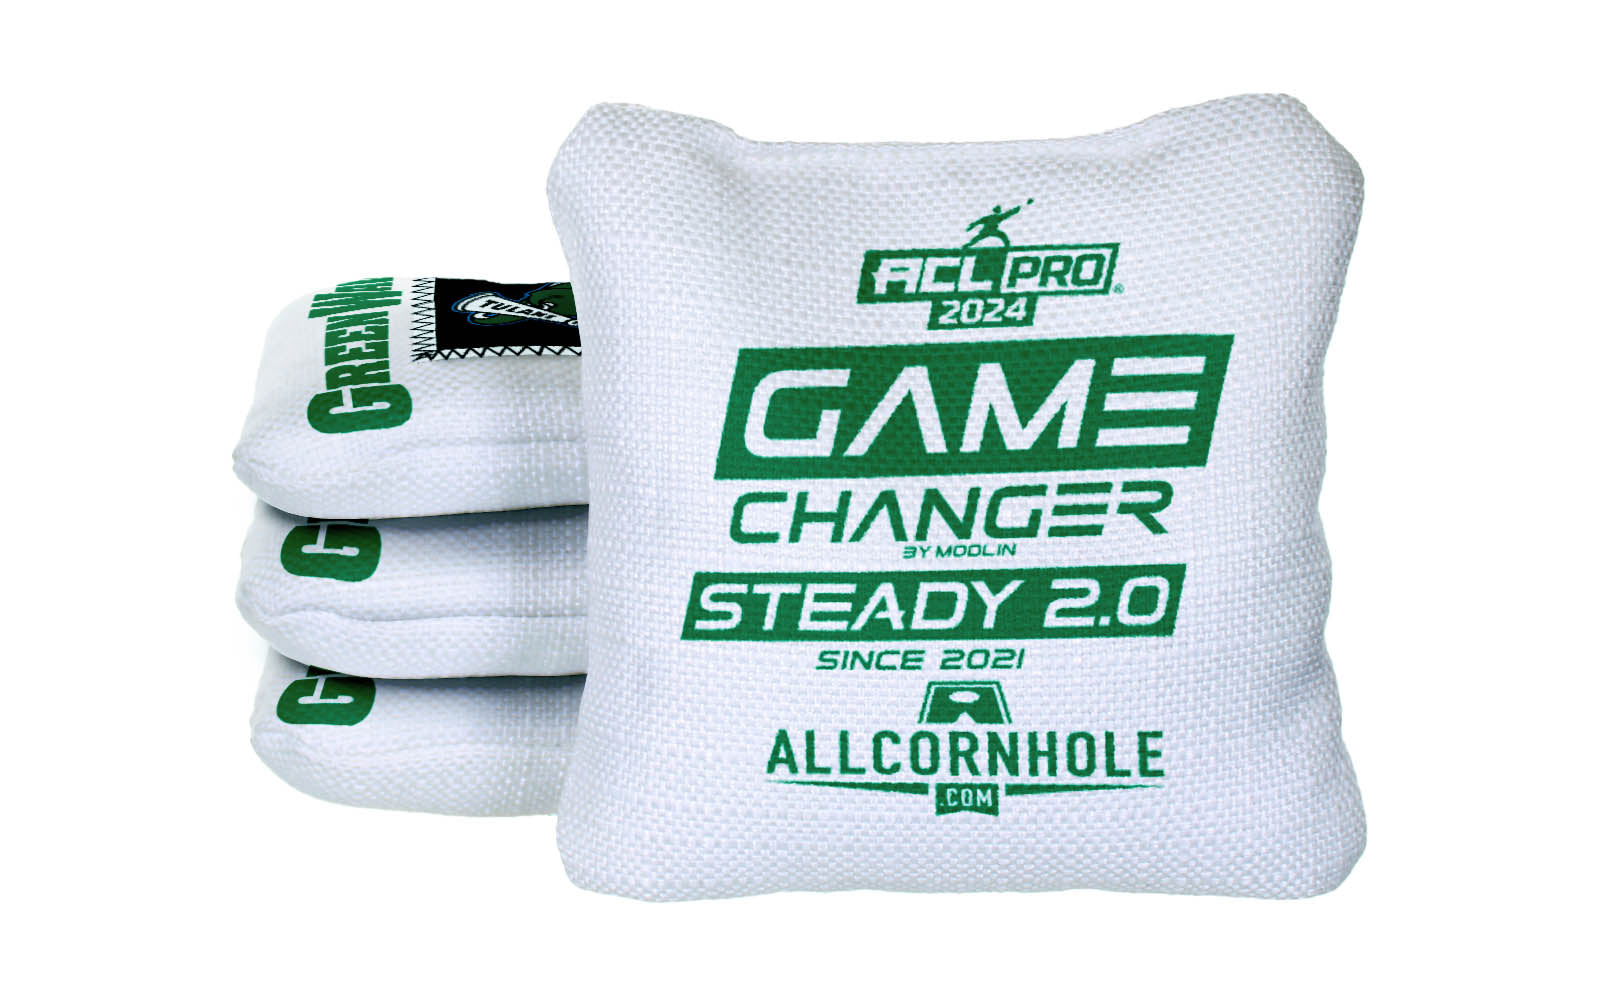 Officially Licensed Collegiate Cornhole Bags - AllCornhole Game Changers Steady 2.0 - Set of 4 - Tulane University